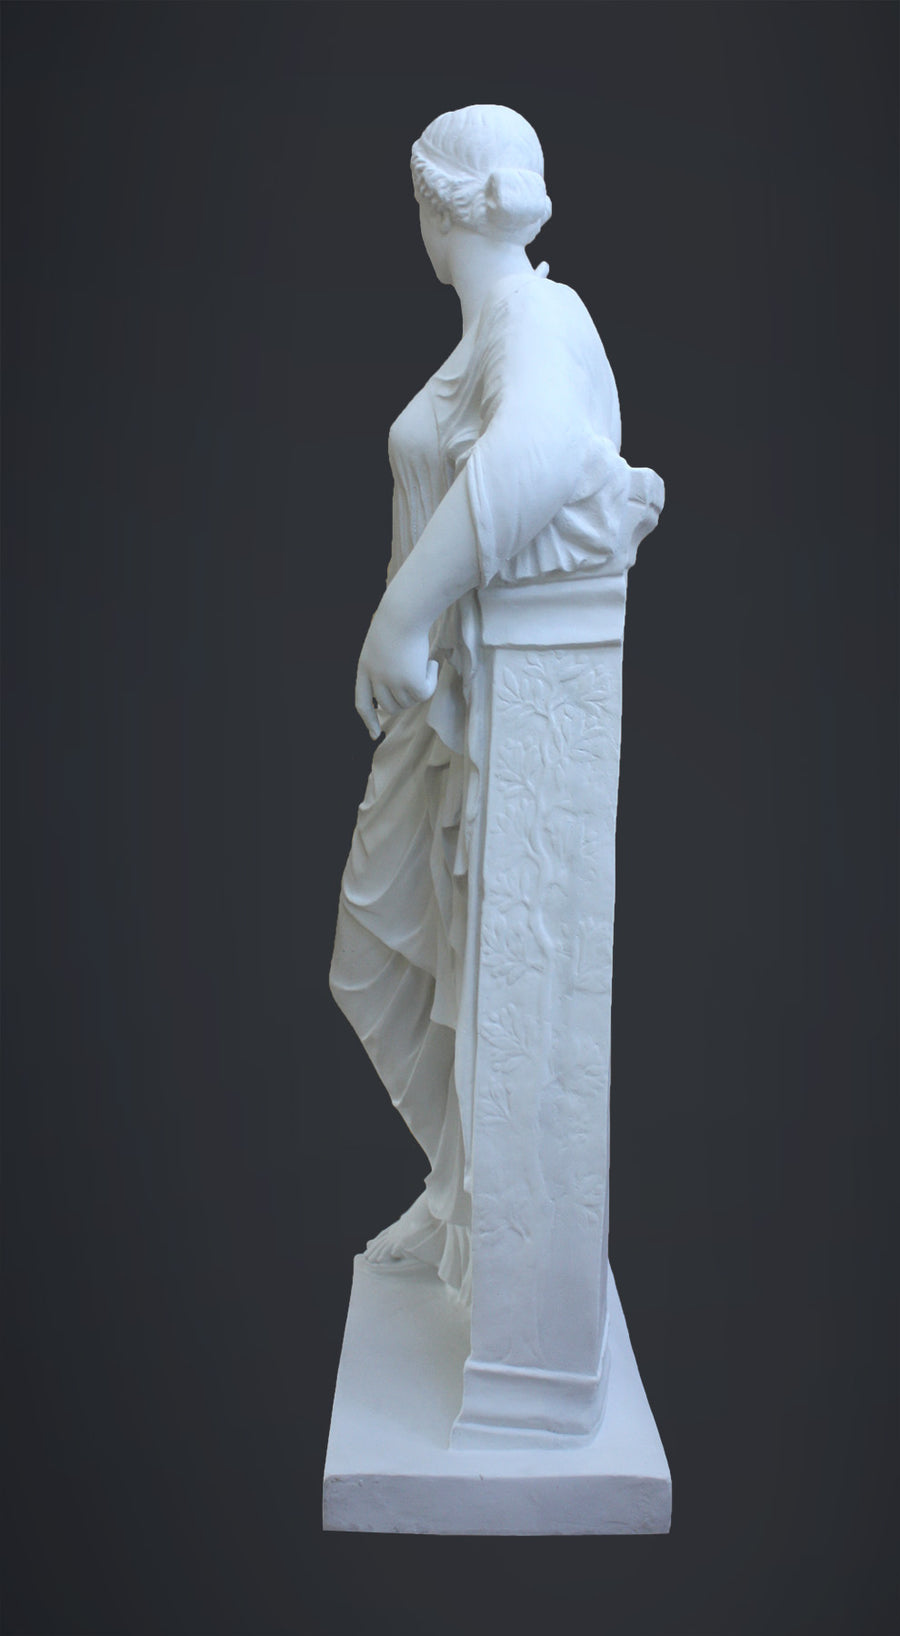 photo of plaster cast sculpture of female figure in robes leaning on podium